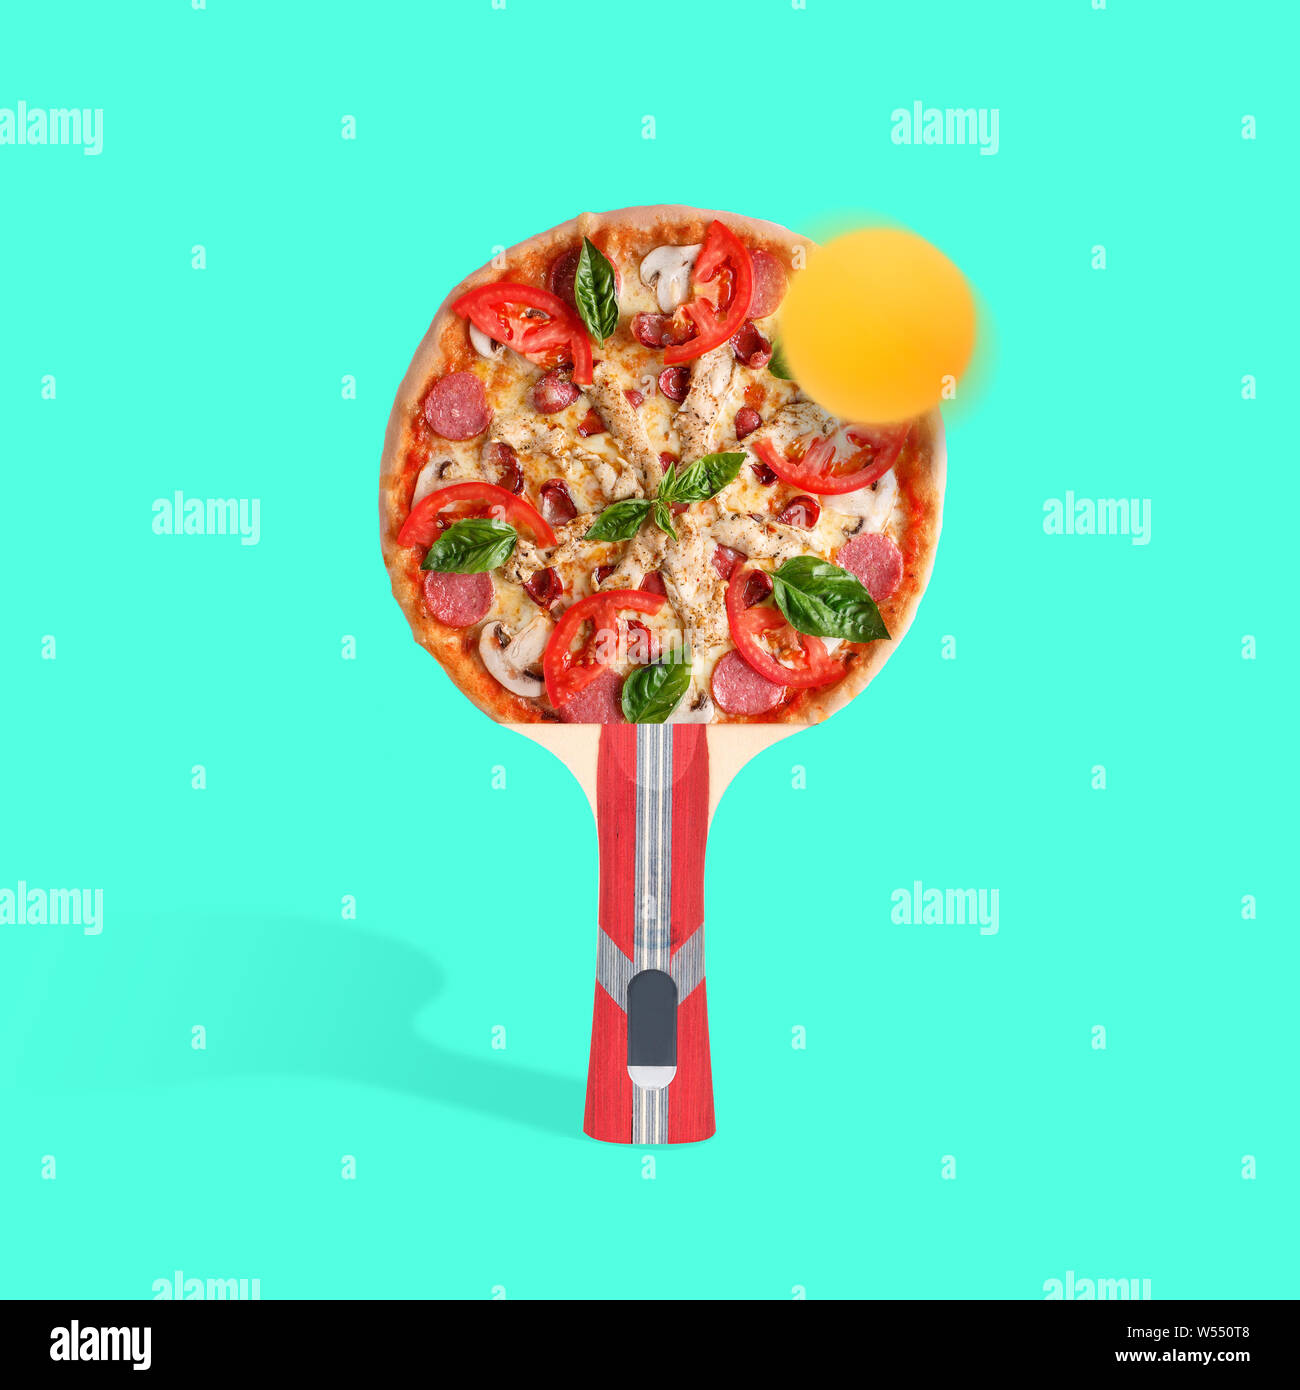 Eating playful. Fast food. Tennis racket as a pizza with tomatos on blue  background. Negative space to insert your text. Modern design. Contemporary  art. Creative conceptual and colorful collage Stock Photo -